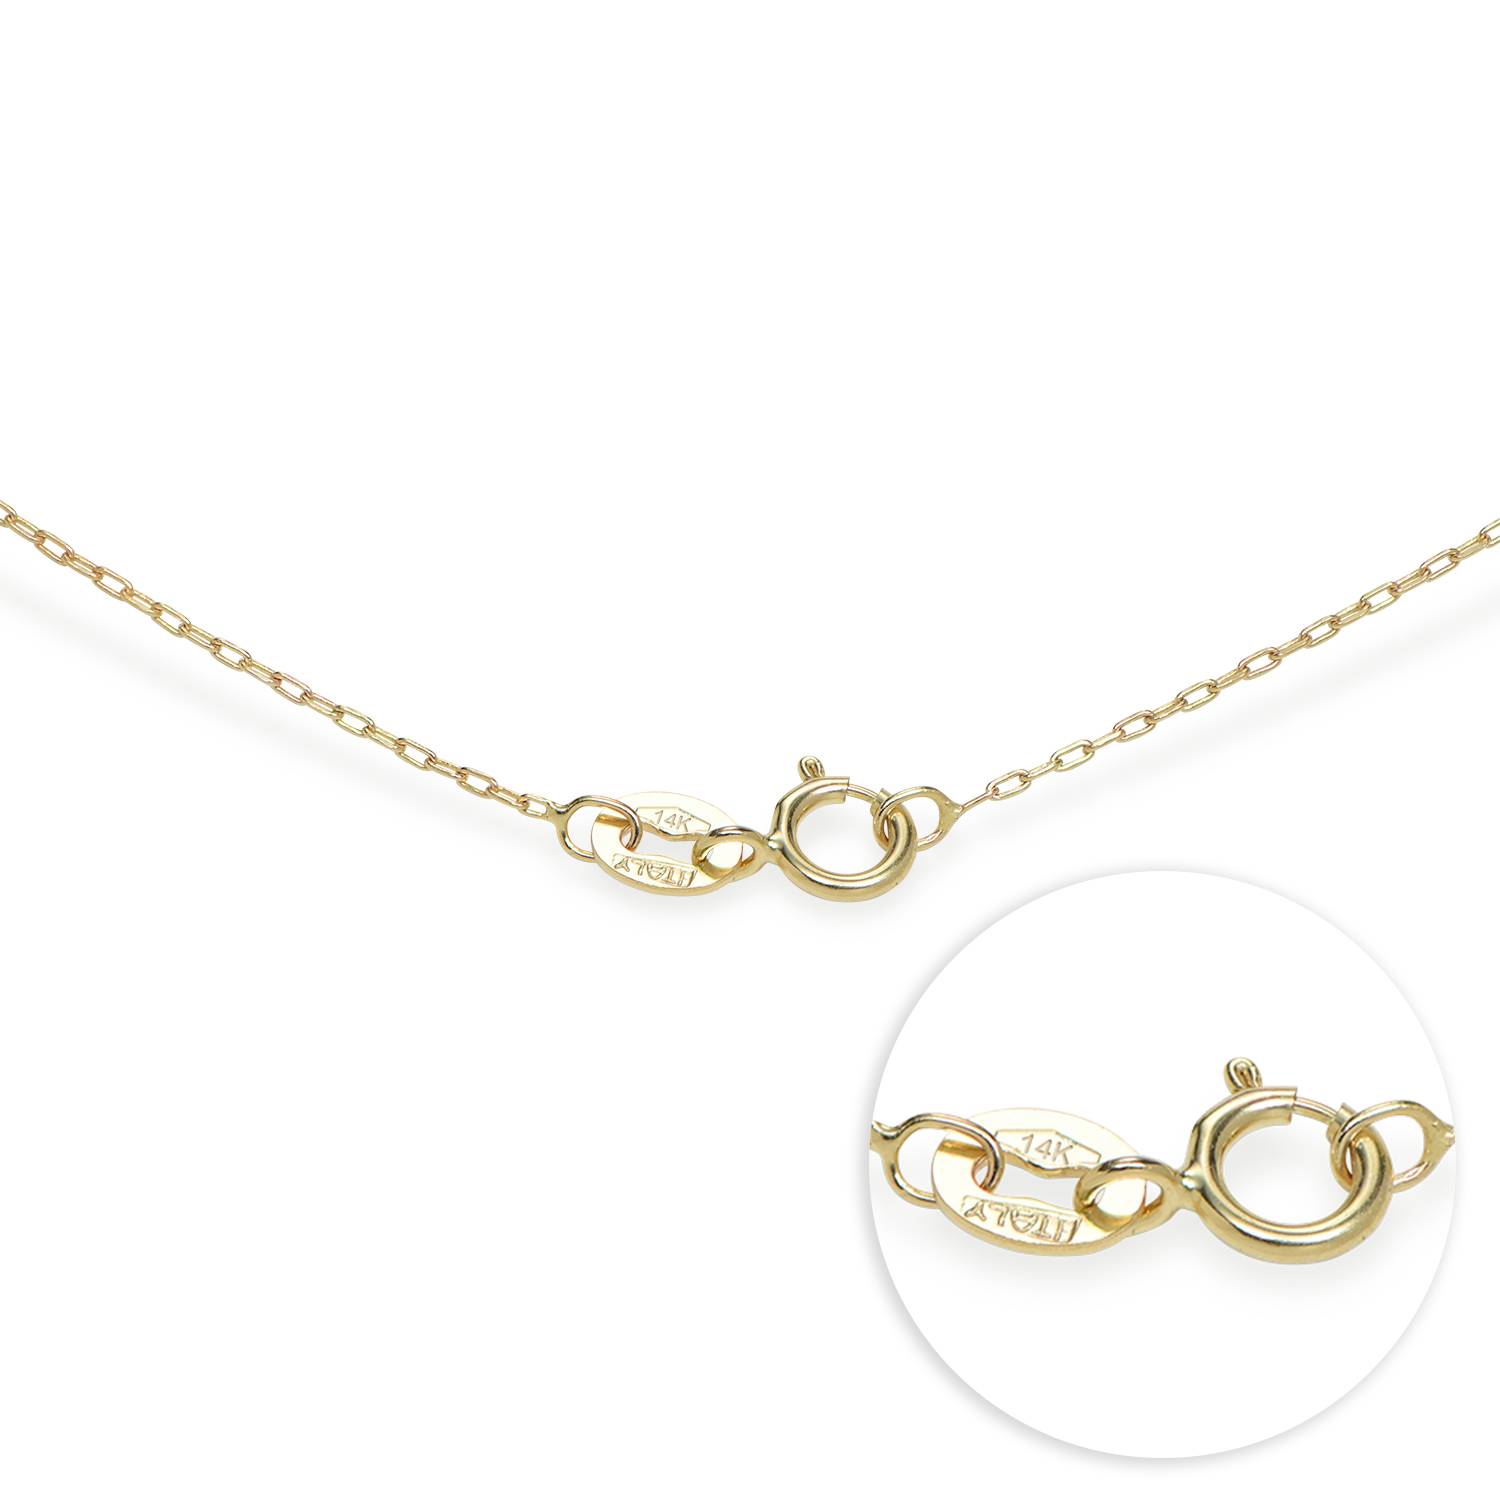 Double Thickness "Carrie" Name Necklace in 14ct gold-4 product photo